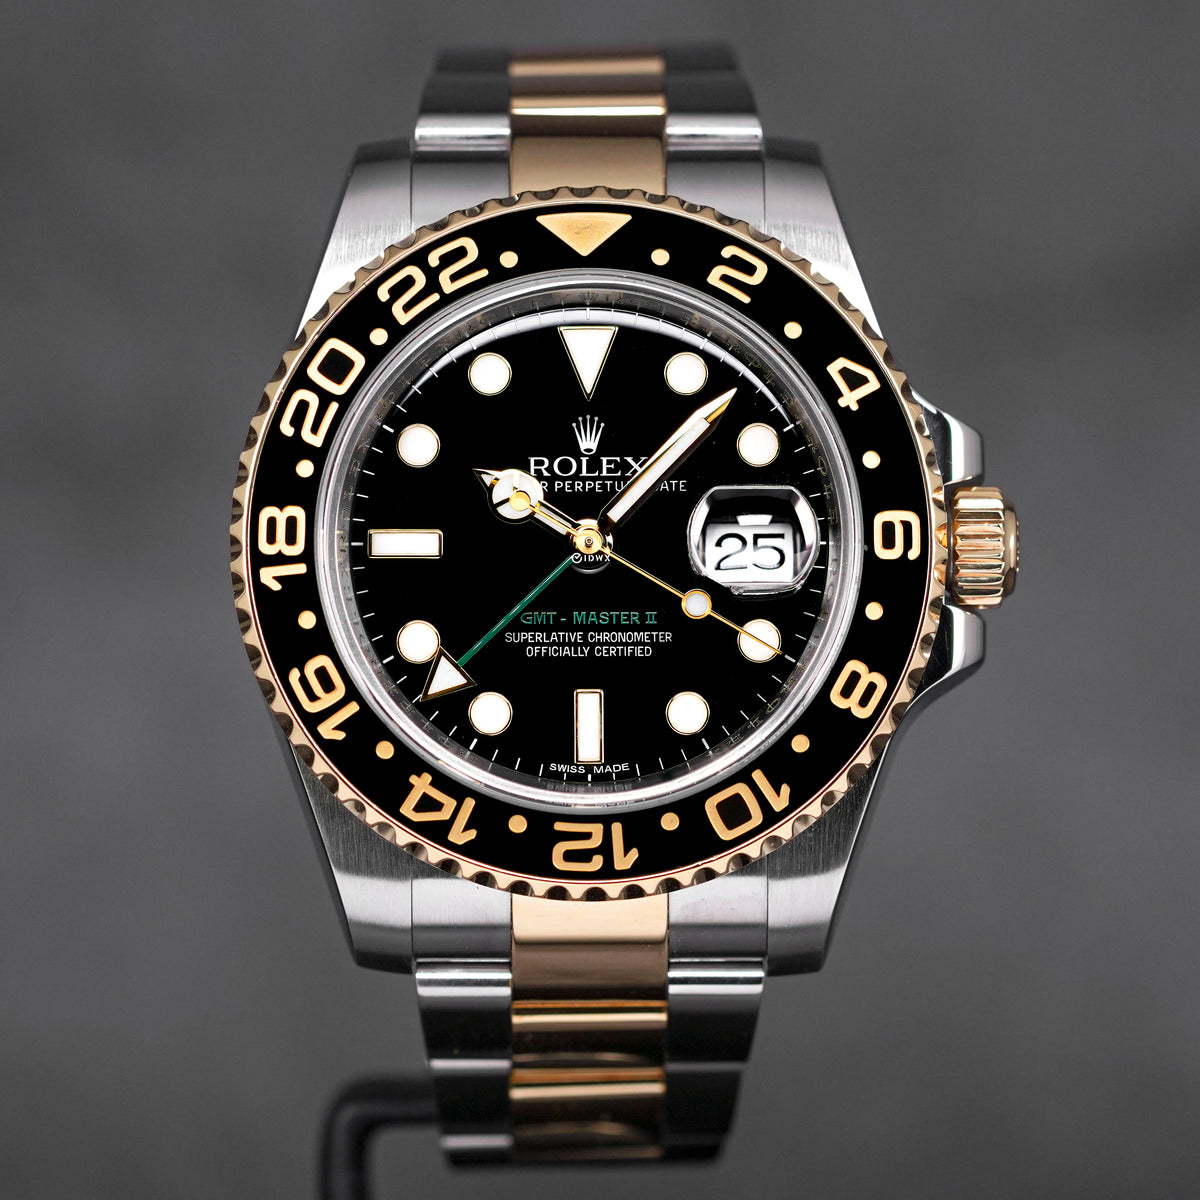 GMT MASTER-II TWOTONE YELLOWGOLD BLACK DIAL (2010)